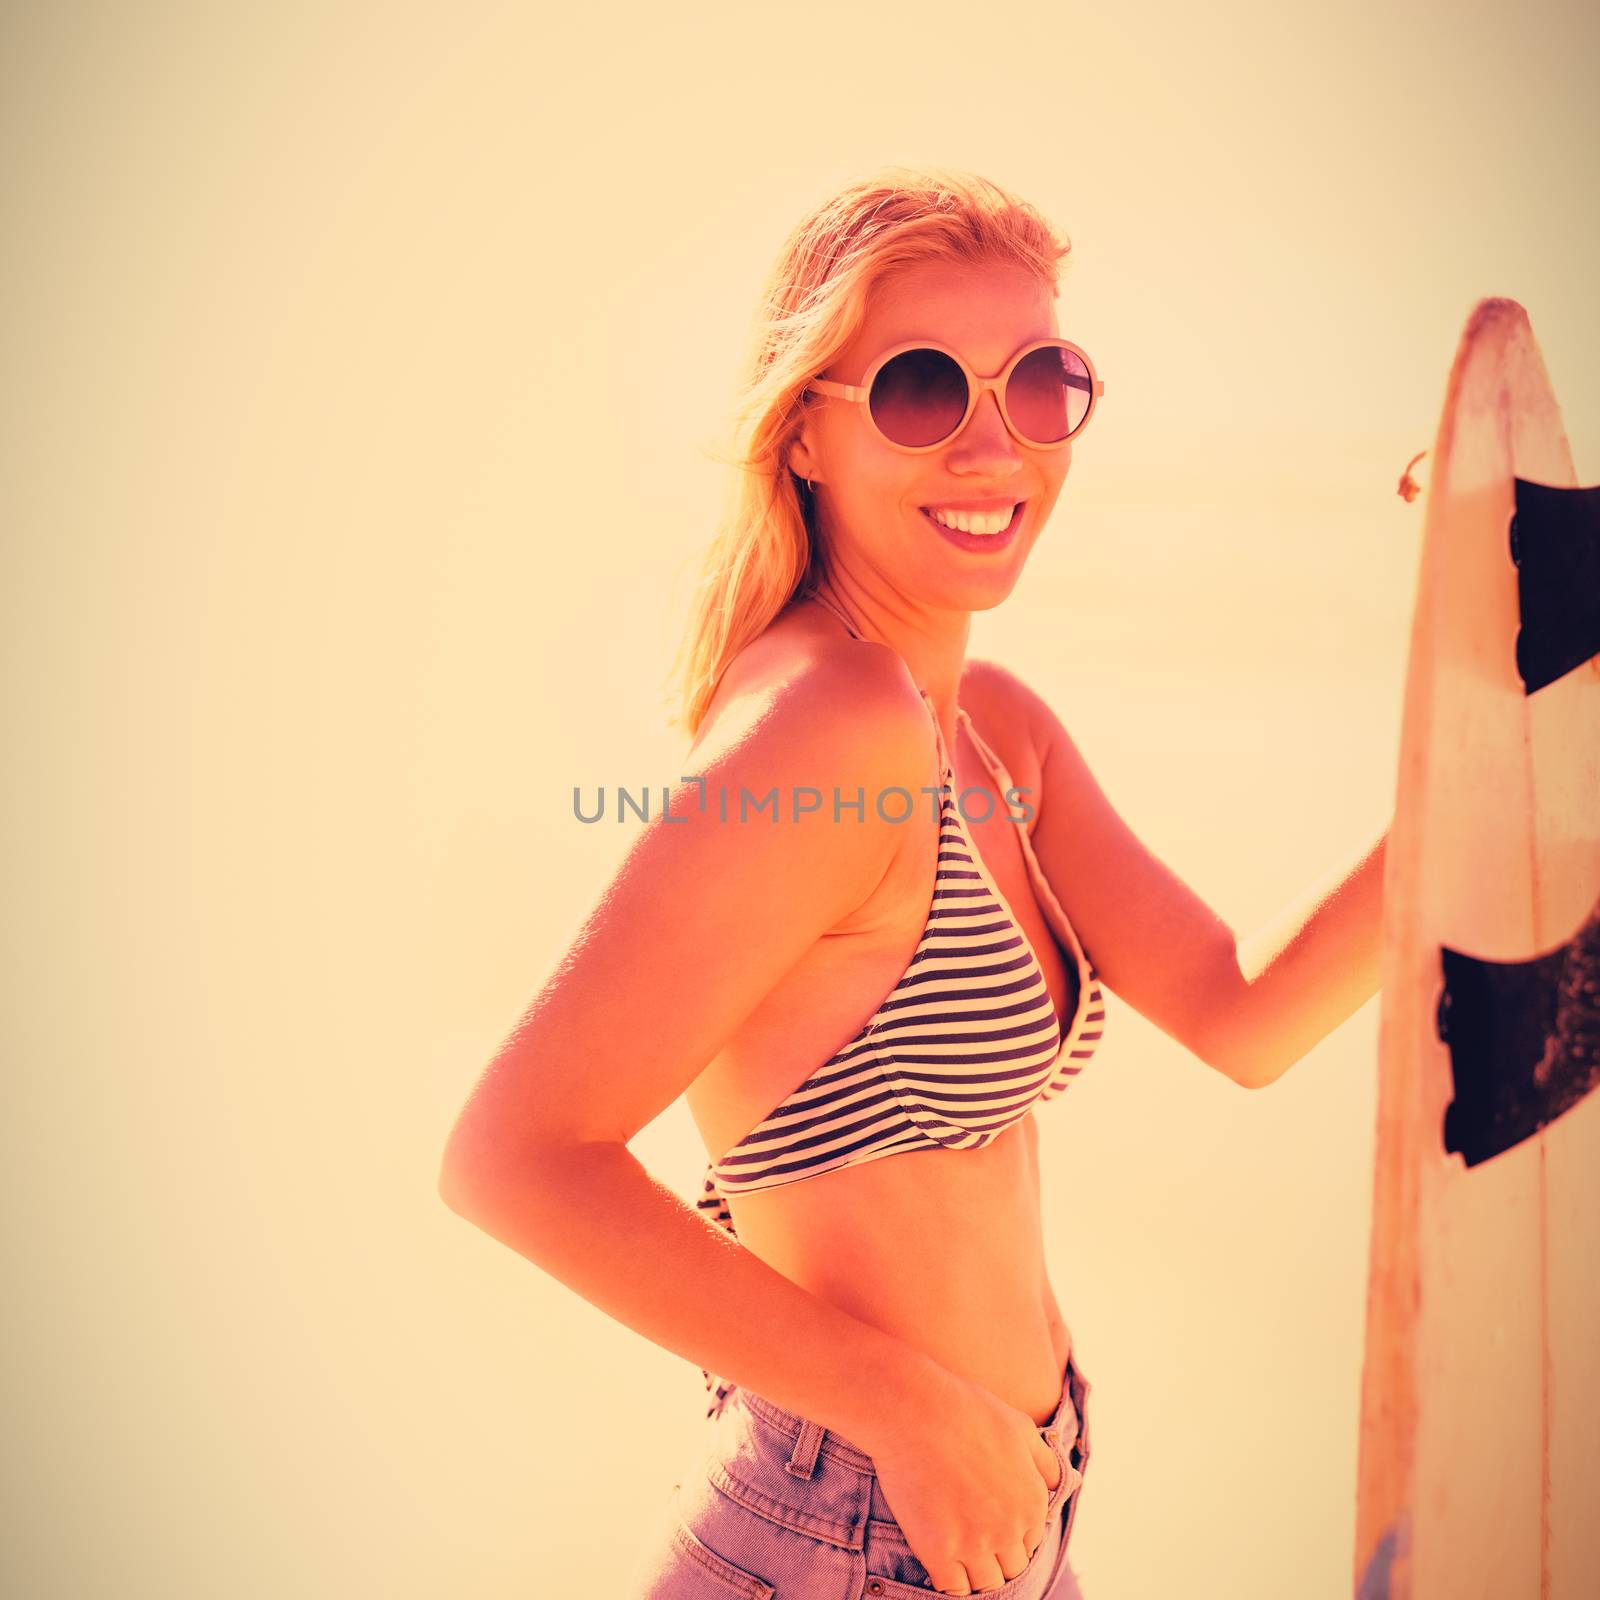 Portrait of smiling young woman holding surfboard at beach by Wavebreakmedia